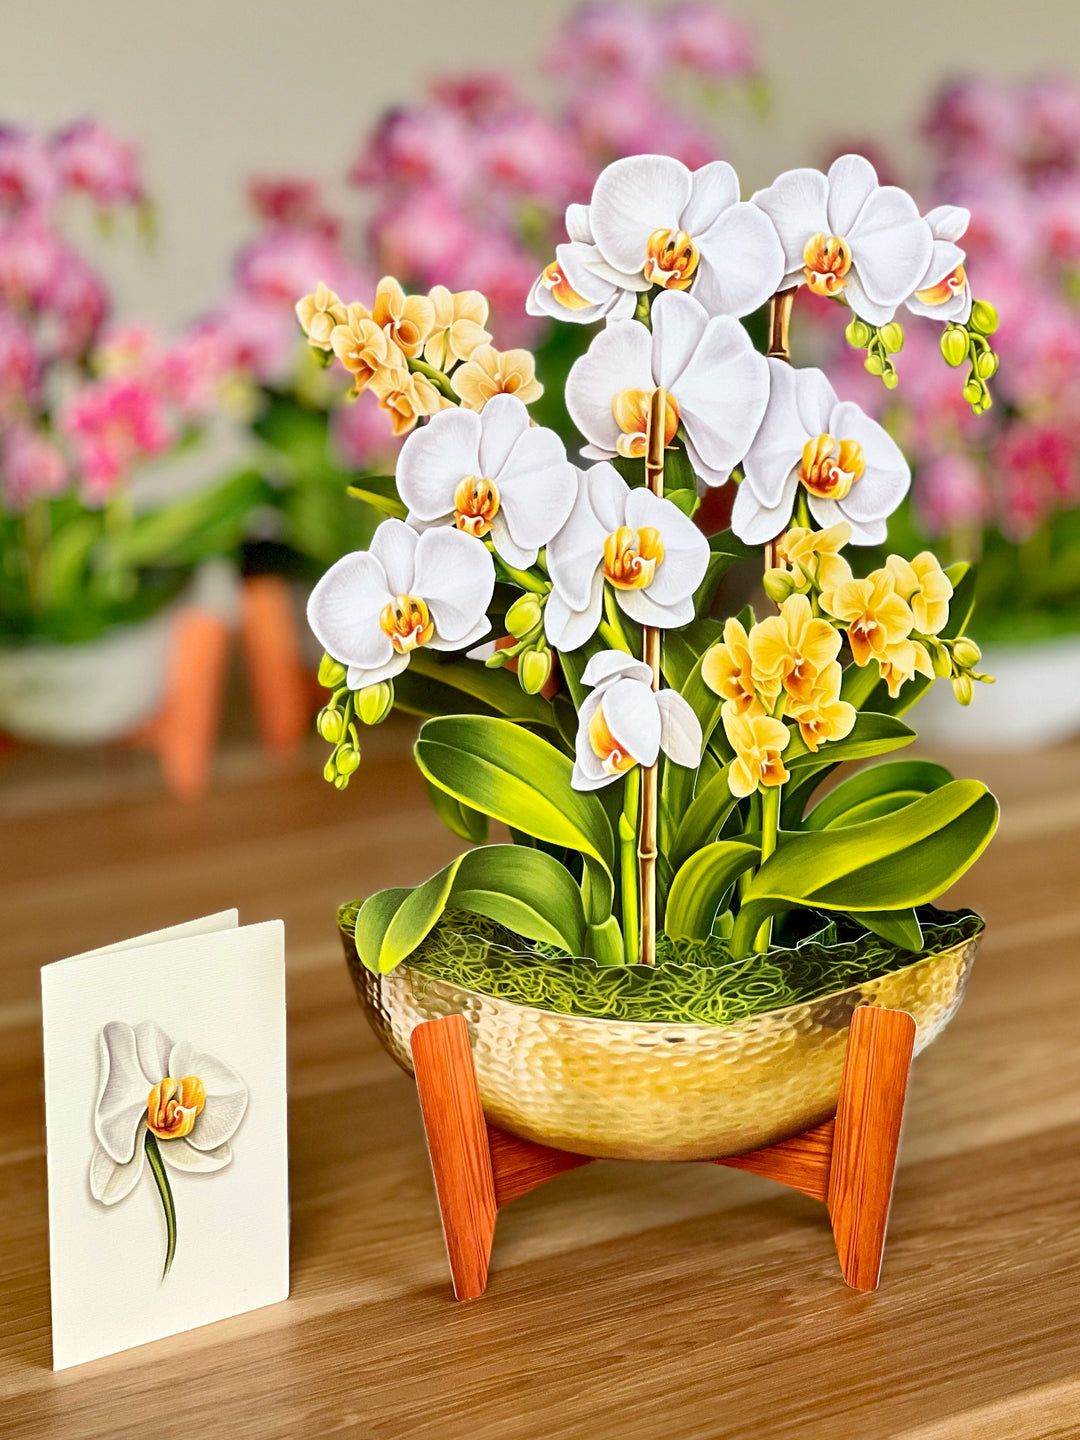 Pop Up Flower Bouquet Greeting Card - Serenity Orchids